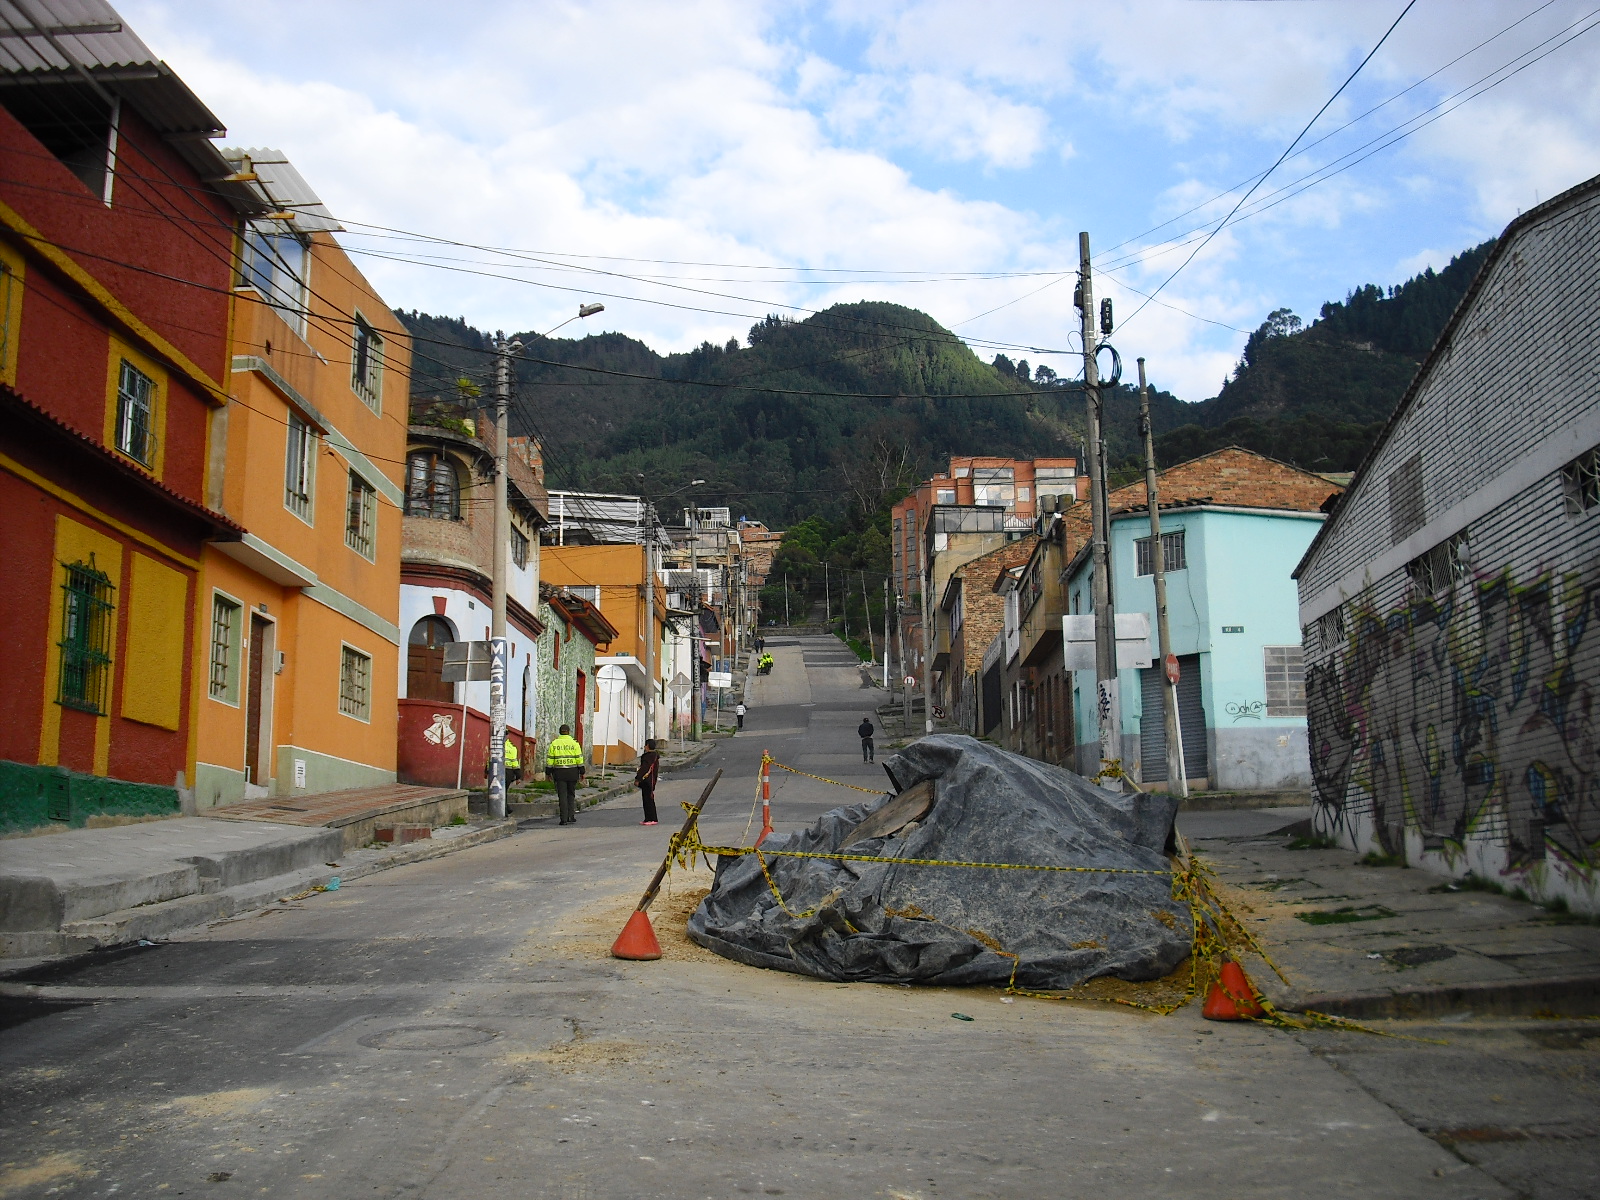 Looking up Calle 31 from Carrera 4 to the Circunvalar, La Perseverencia, Bogotá D.C., Colombia.